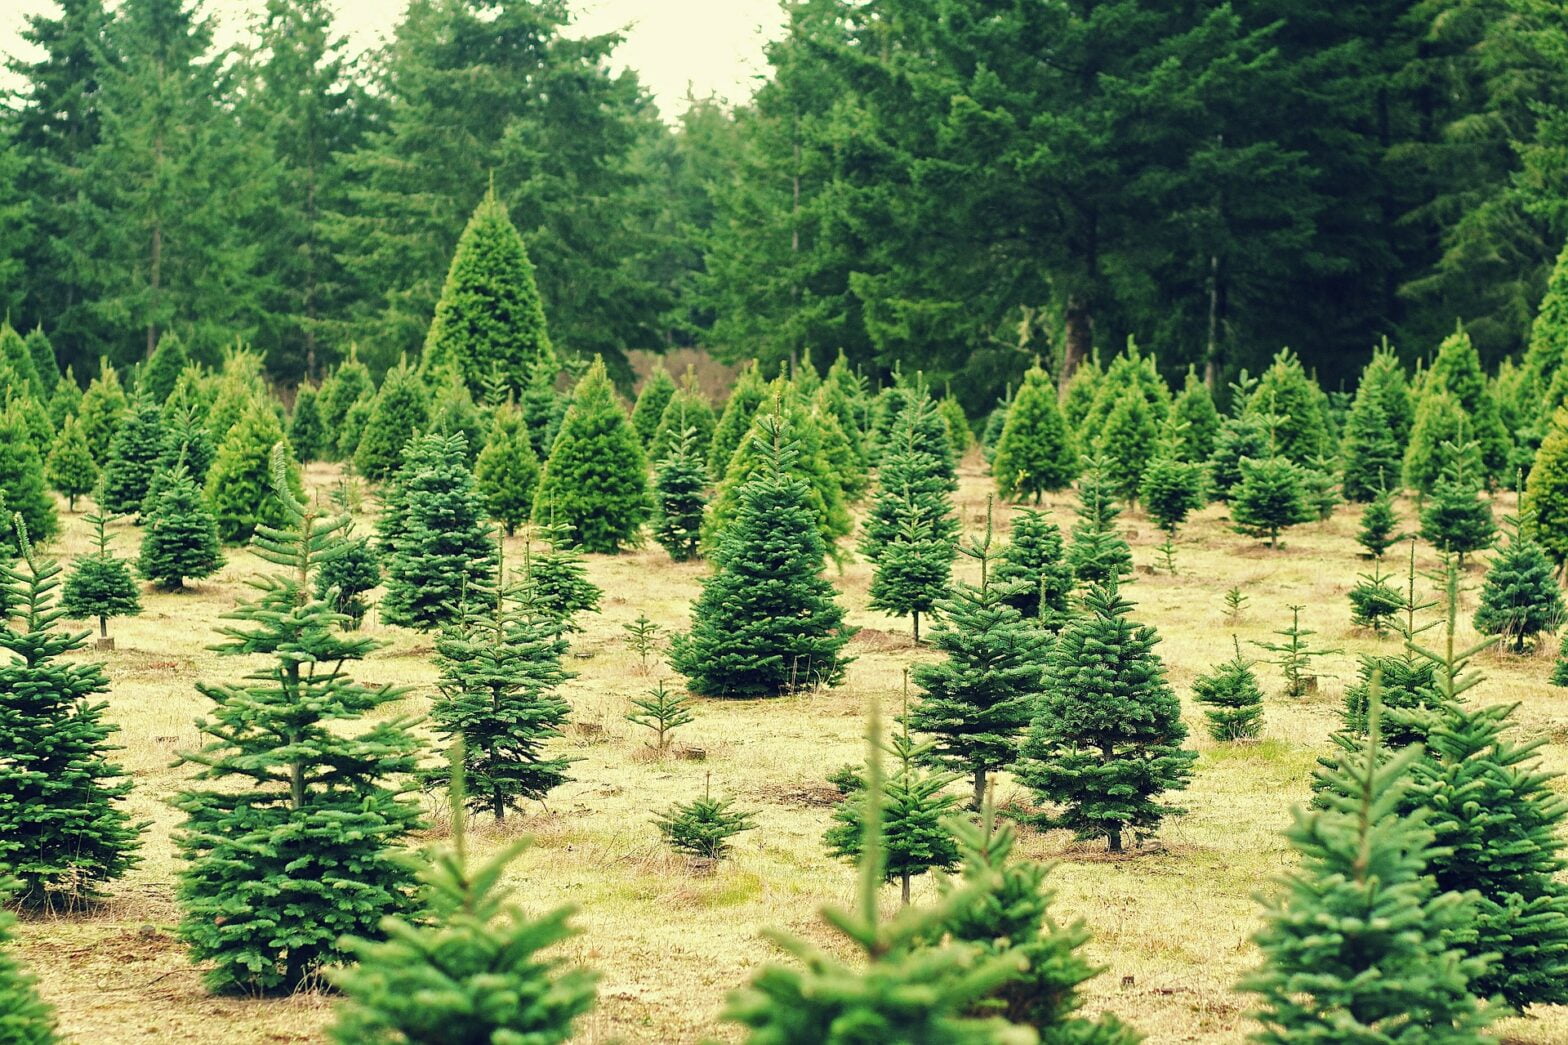 How Many Christmas Trees Per Acre